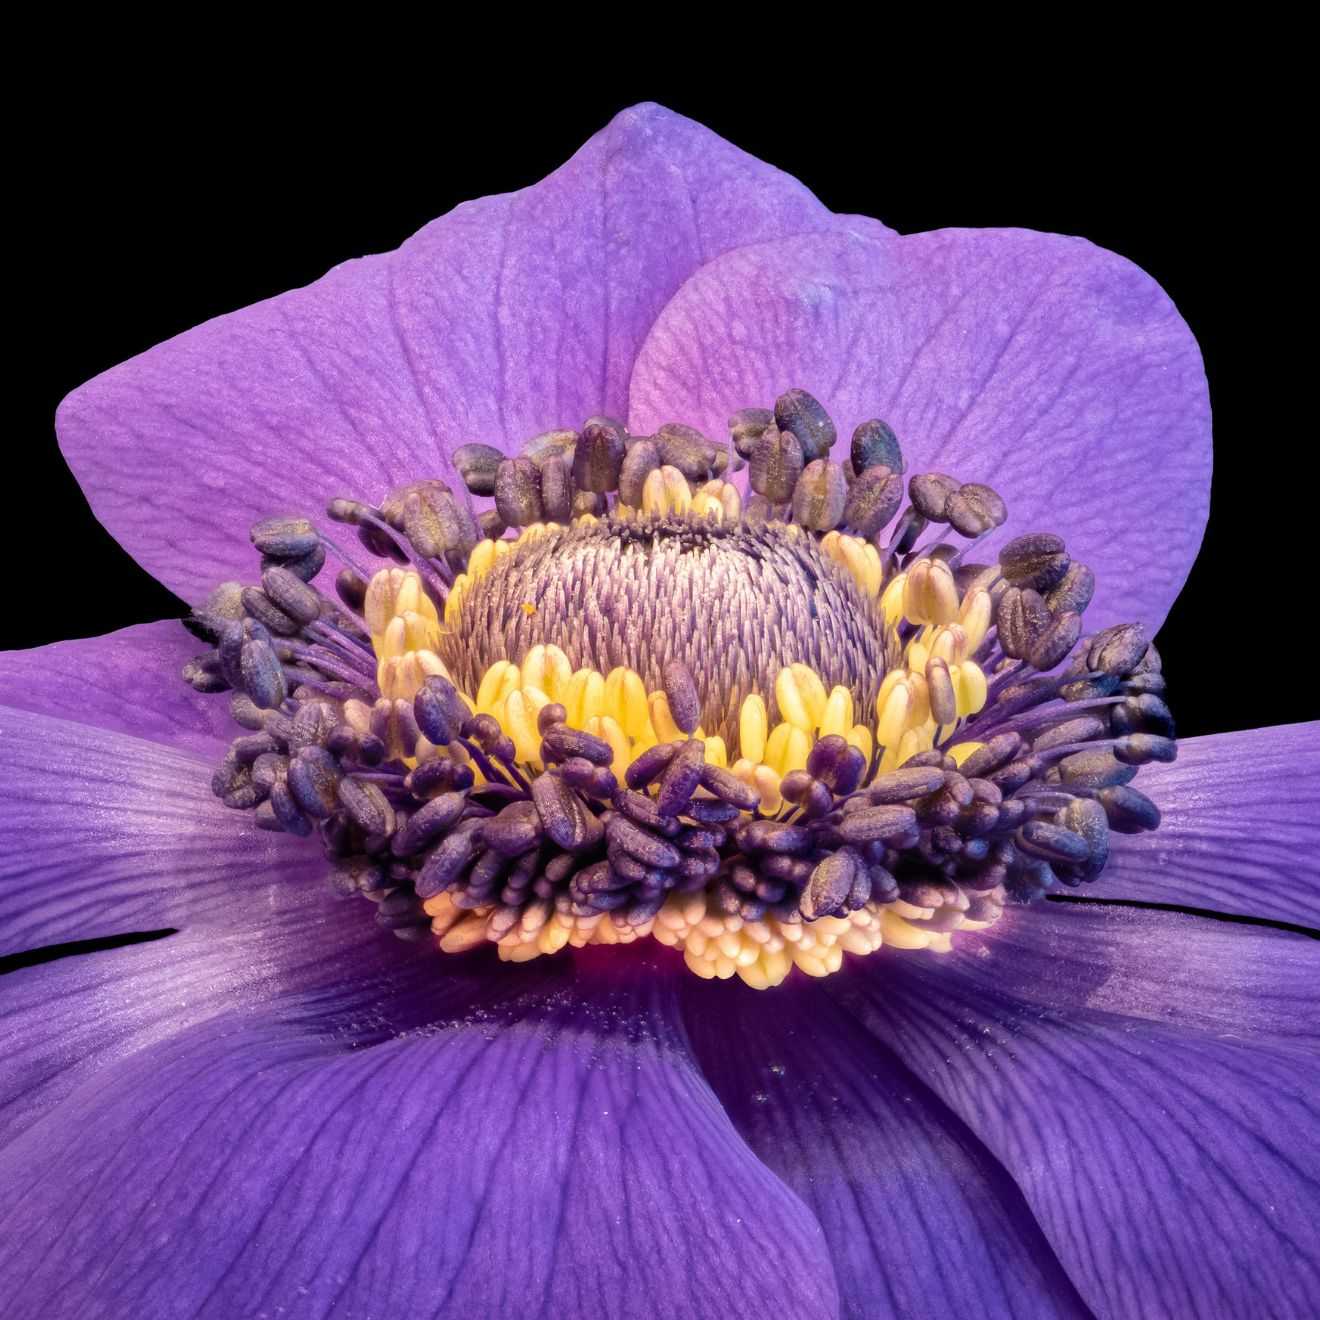 Olaf Holland's stunning imagery allows us to get up close and personal with familiar blooms, and view them in a way we wouldn't normally be able to with the naked eye.